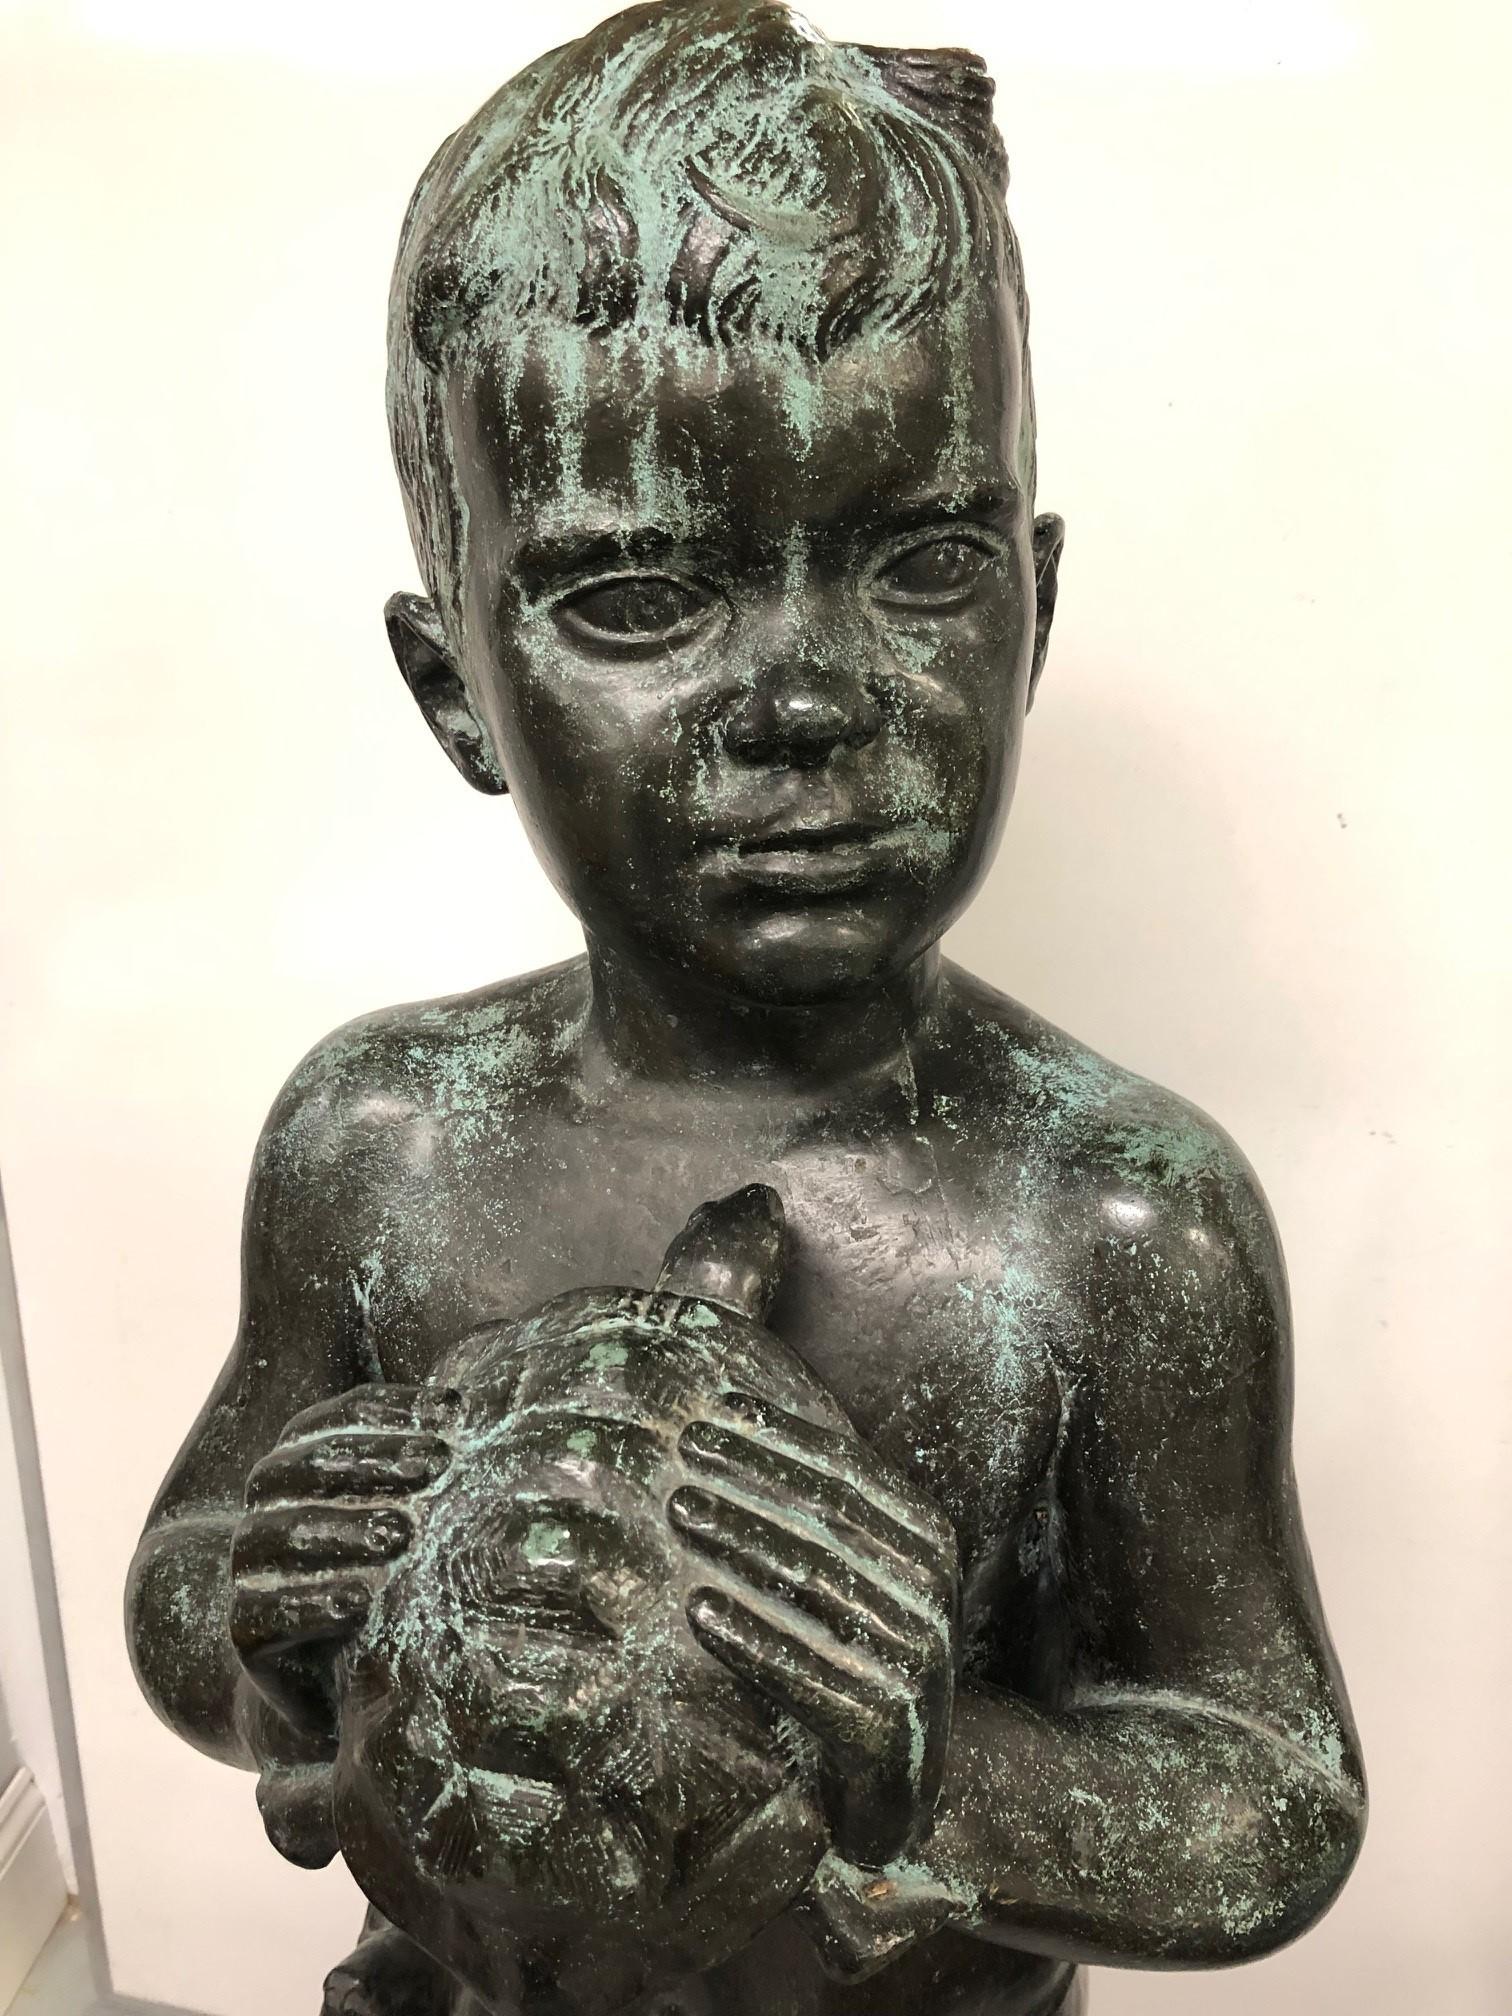 Bronze boy holding a turtle signed by Edward Fenno Hoffman III 1916-1991 American. Beautiful bronze statue of a boy holding a turtle it would look fabulous in a garden or a focal point in a backyard or patio. The statue stands 45